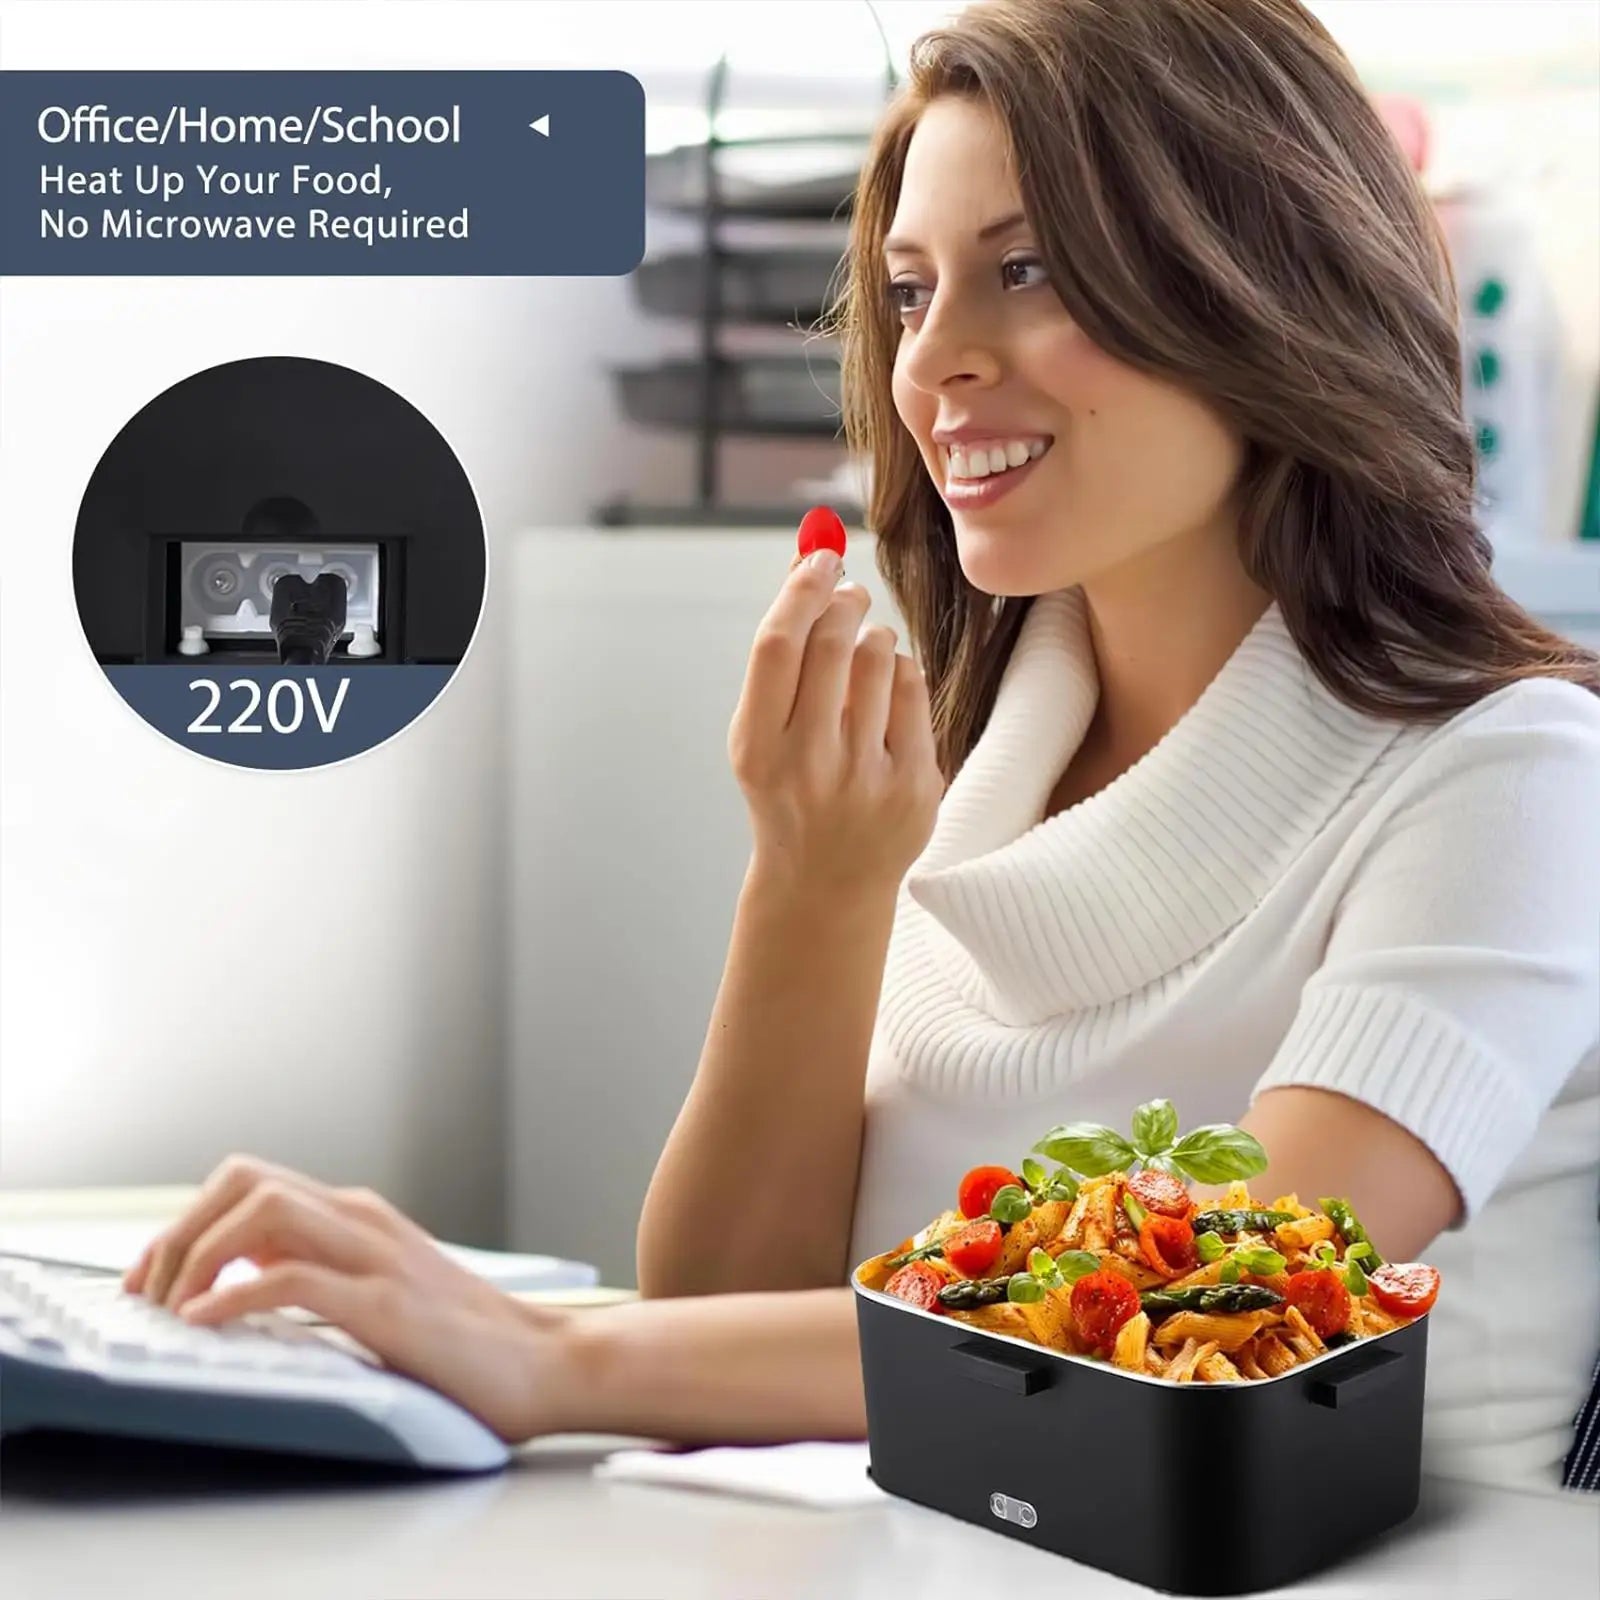 Portable Electric Heated Lunch Box 75W Stainless Steel Detachable 1.8L Heating Bowl Car/Truck/Office Dining Box Microwave Oven